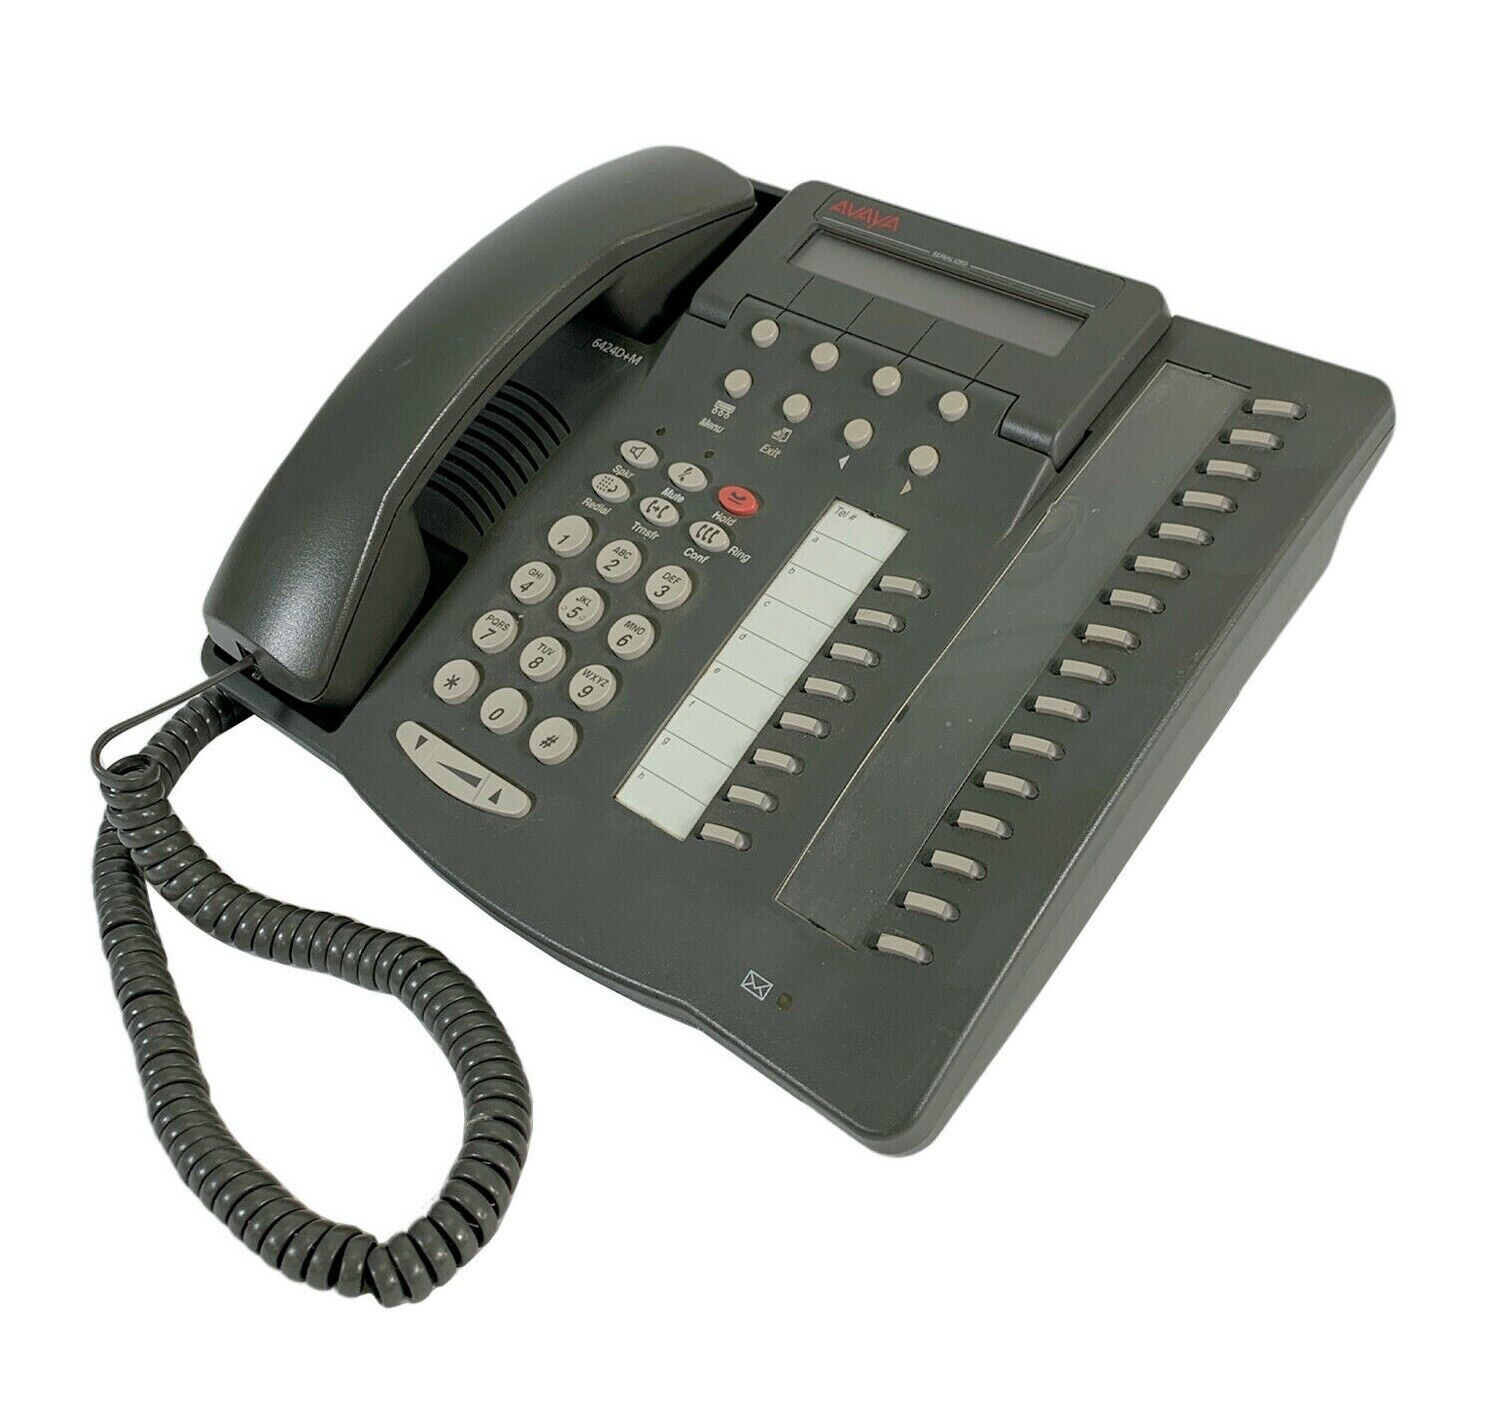 IP Phone/Telephone for Hotel Motel Small Business Workstation Restaurants 